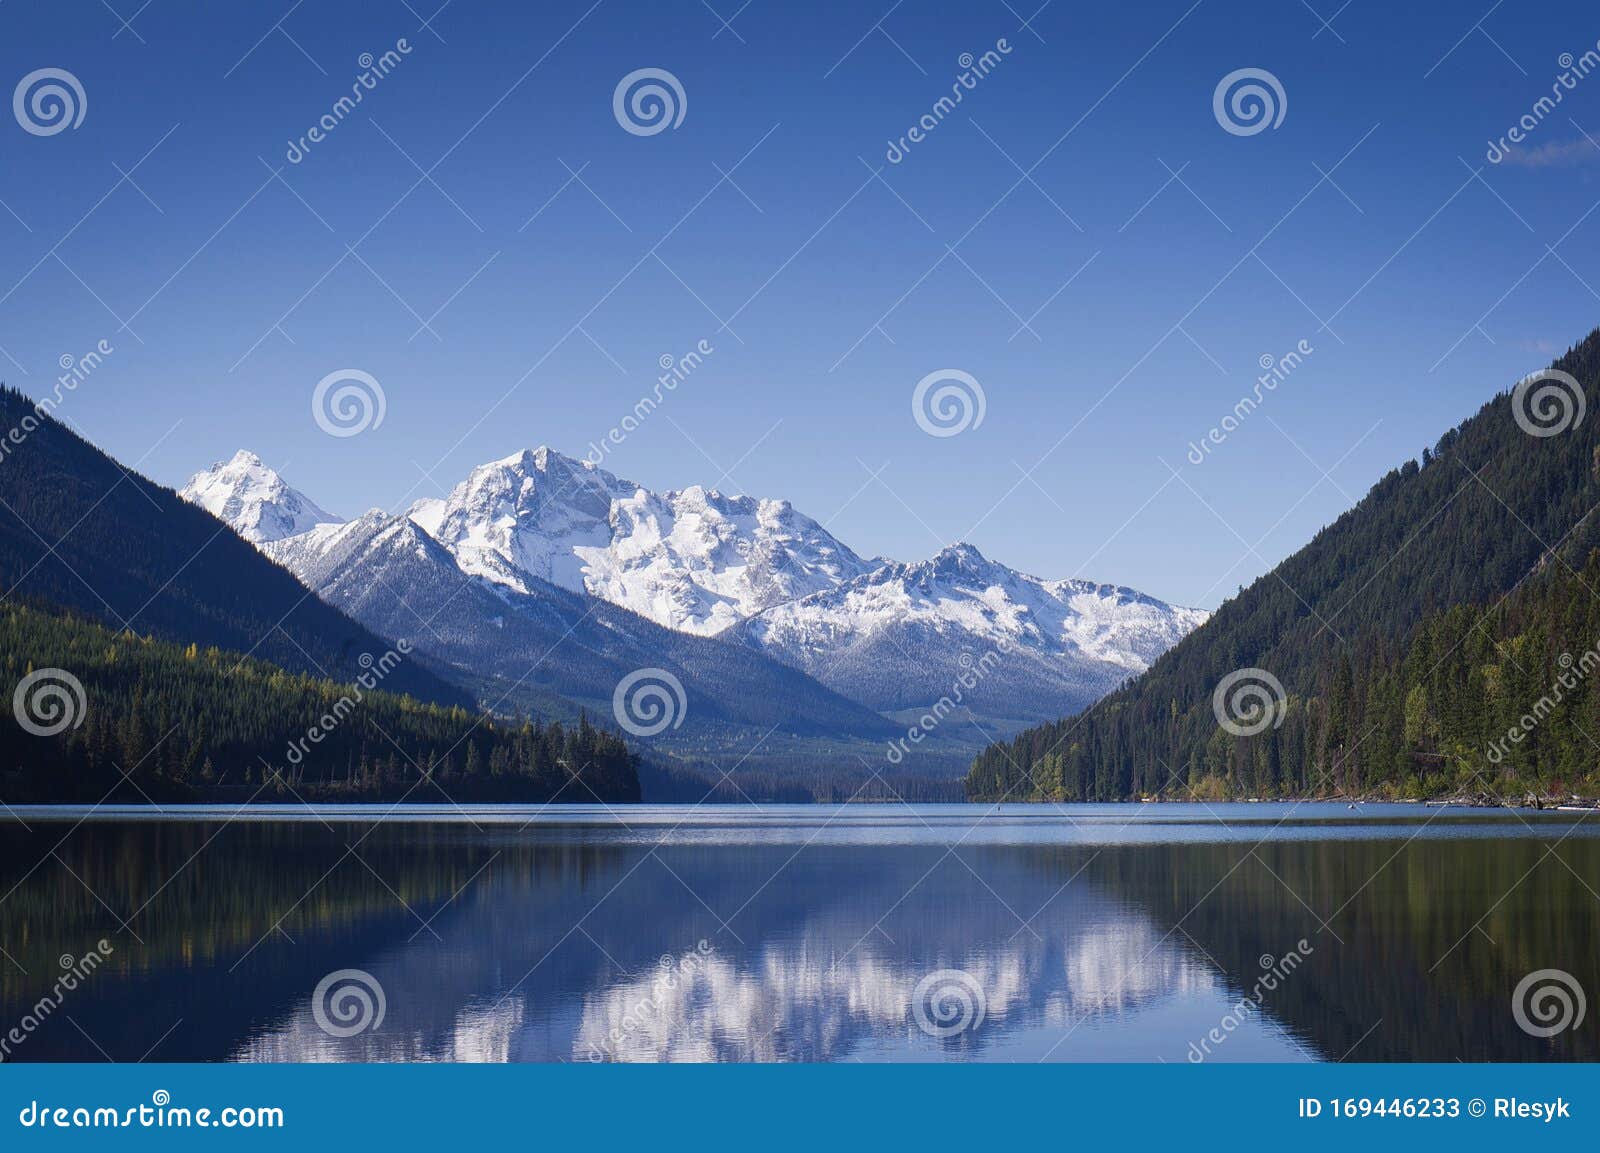 calm duffy lake and snow covered mountains